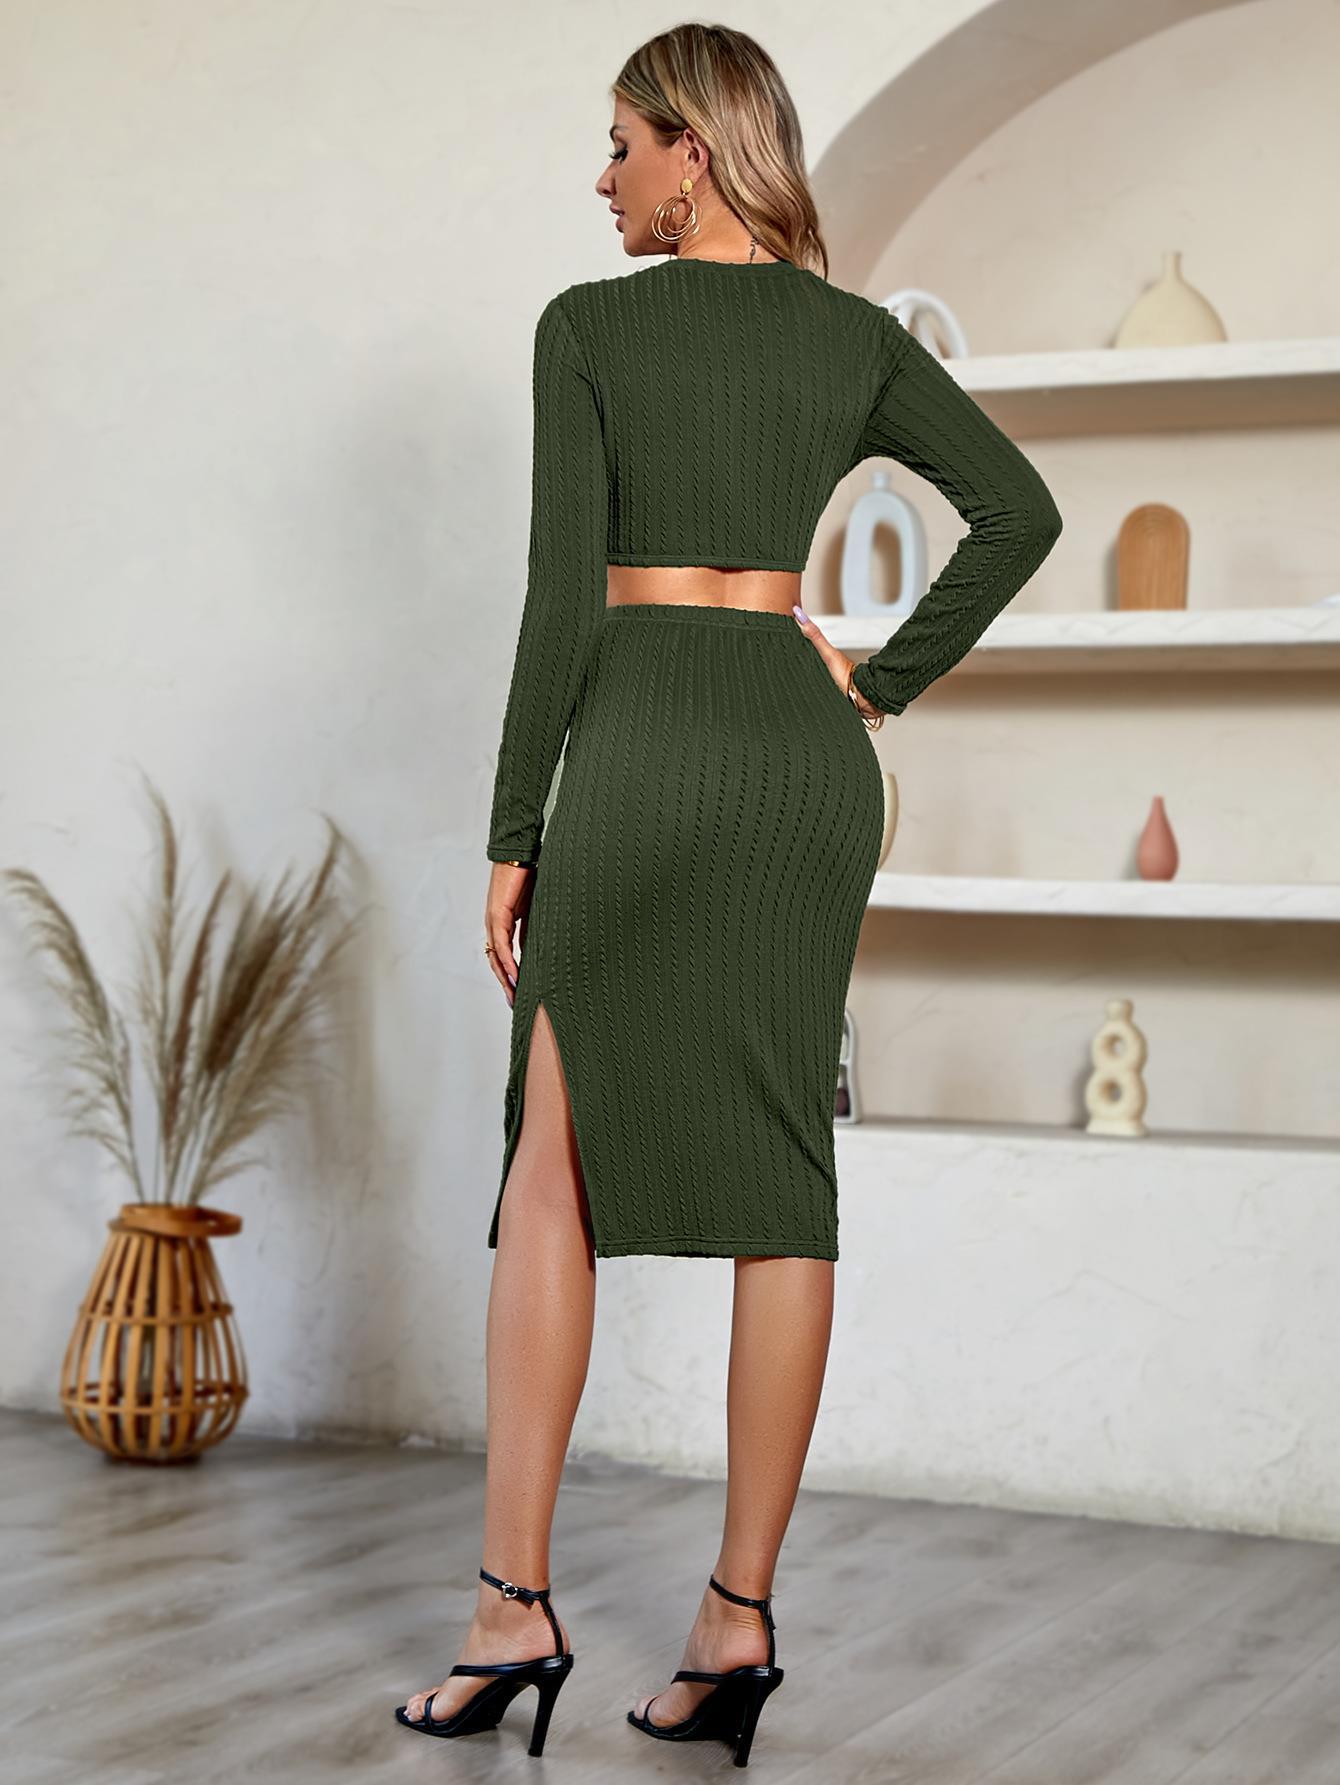 Sexy Knitted Midi Dresses For Women Elegant Red Hollow Out Slit Basic Dress Autumn Winter Casual Slim New In Dresses 2023   114.99 EZYSELLA SHOP